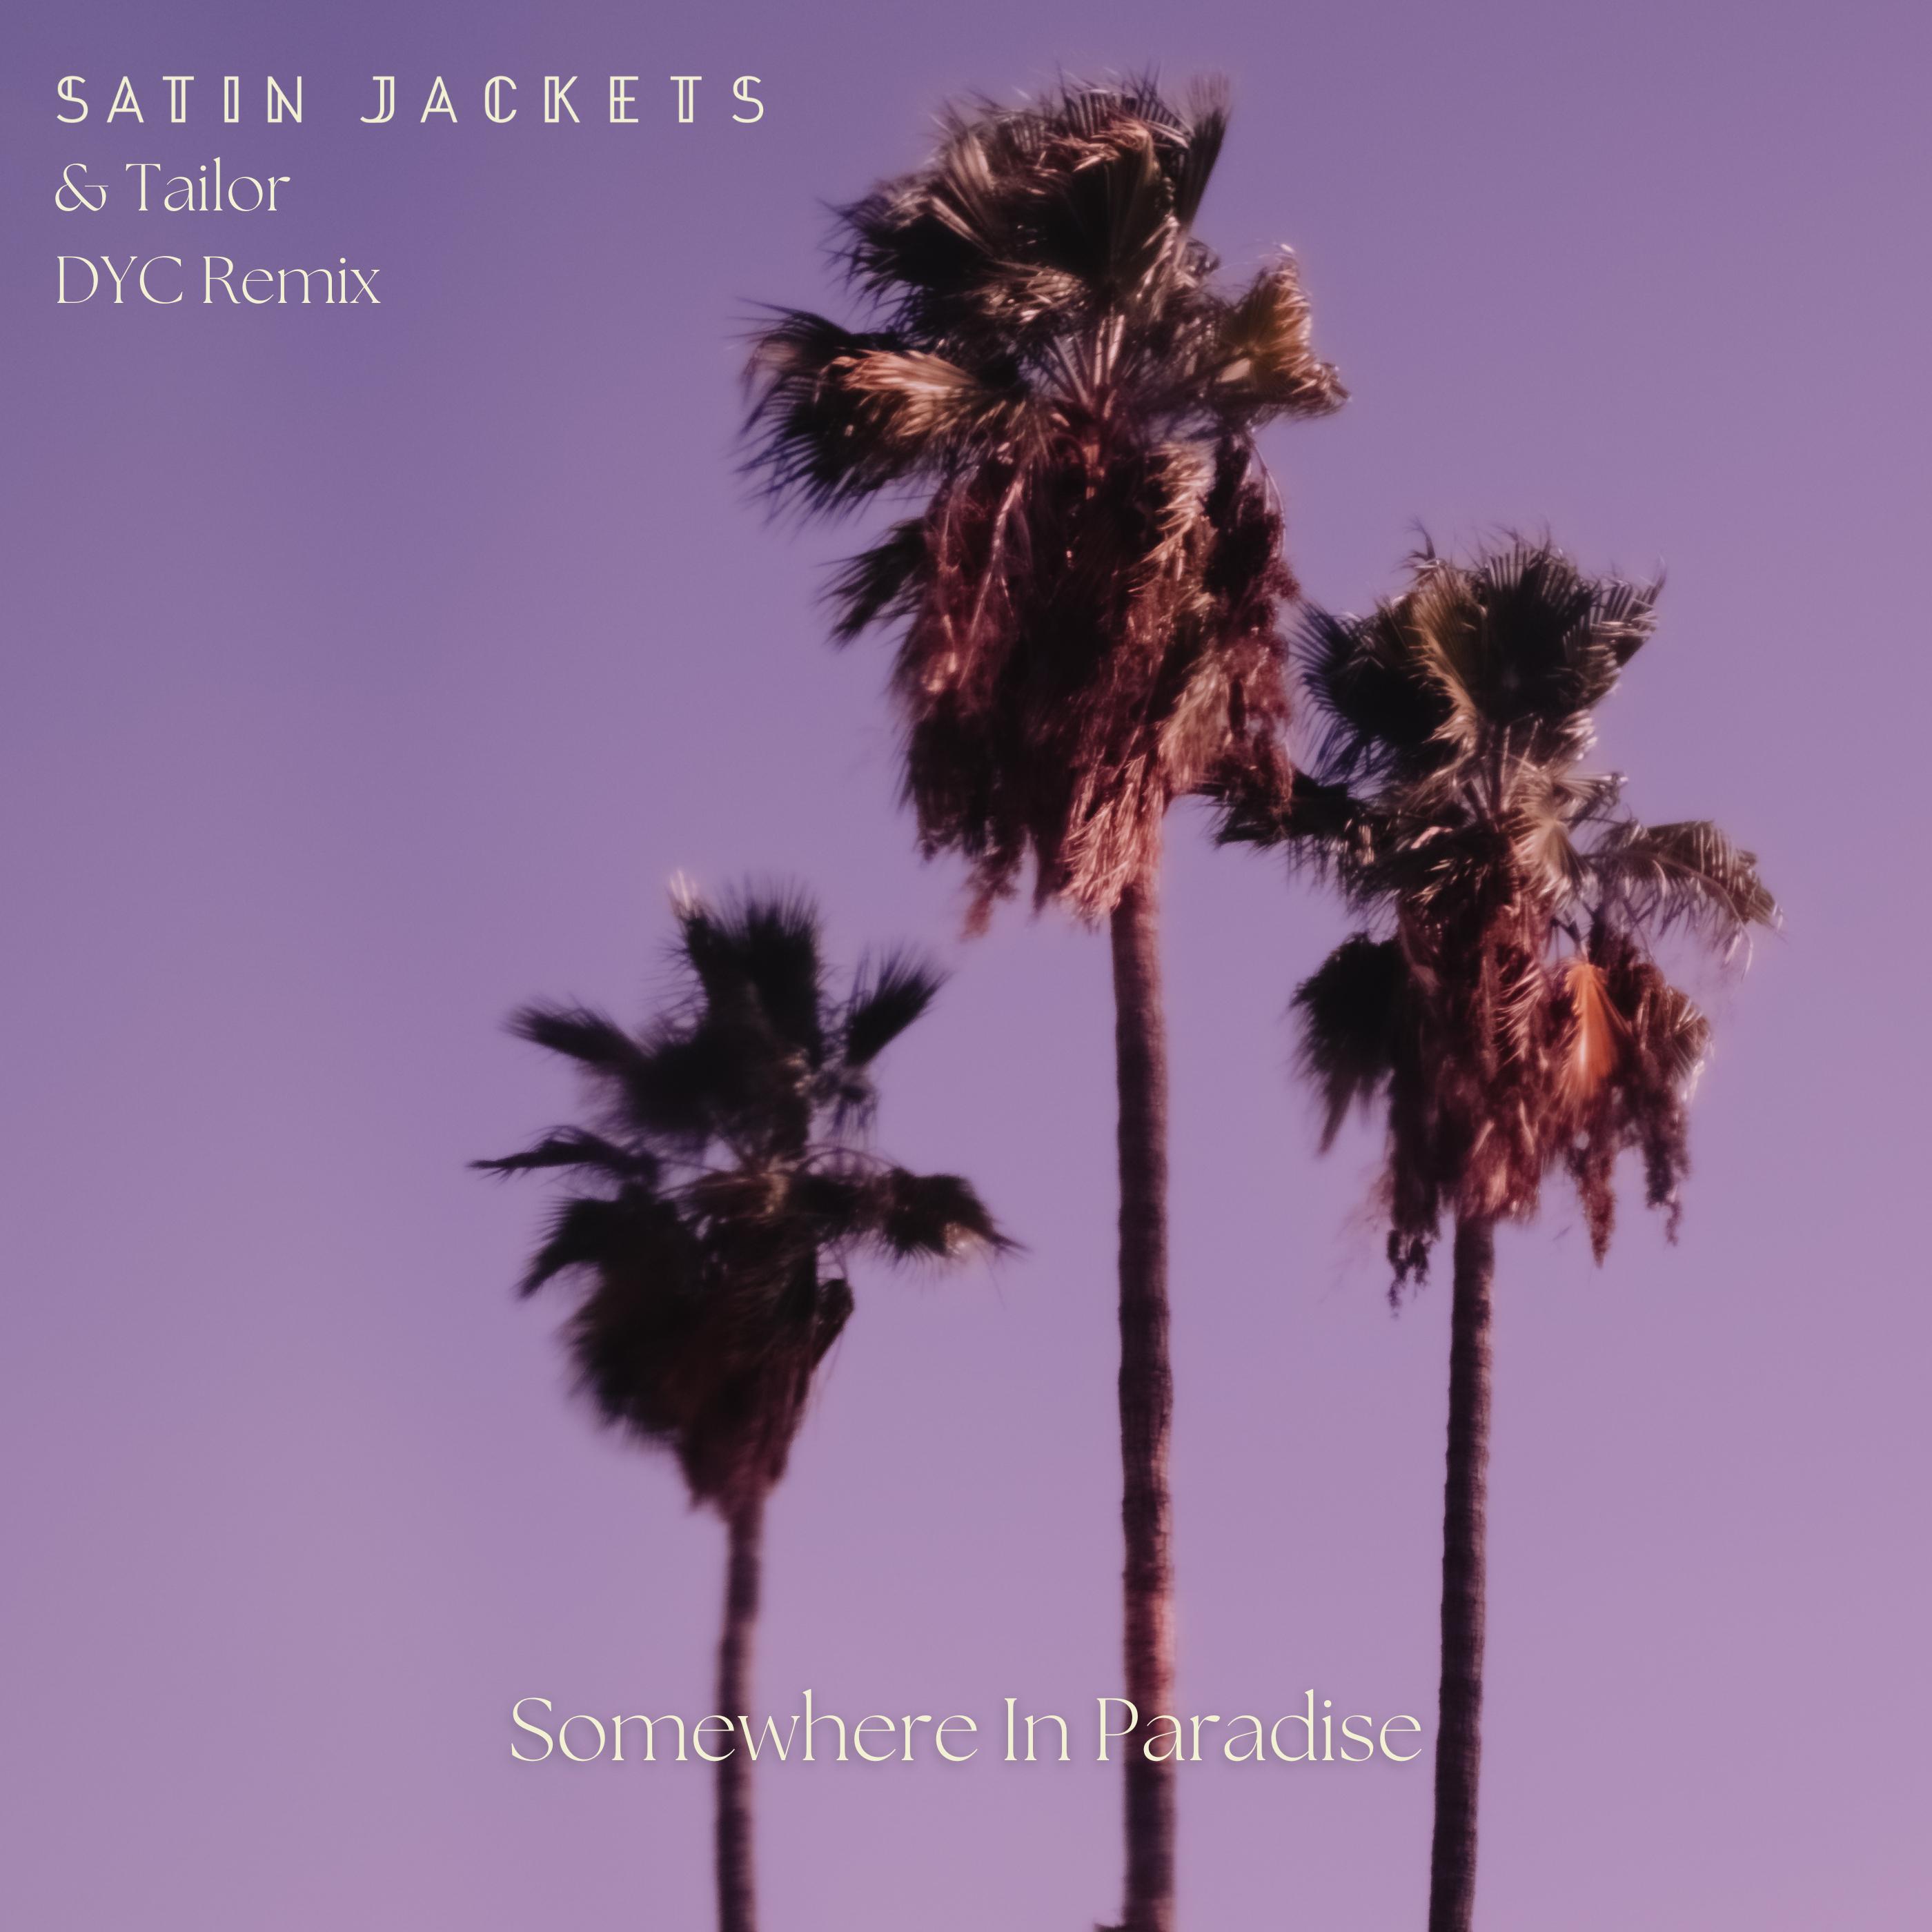 Satin Jackets, Tailor - Somewhere In Paradise (Dyc Remix) текст слова